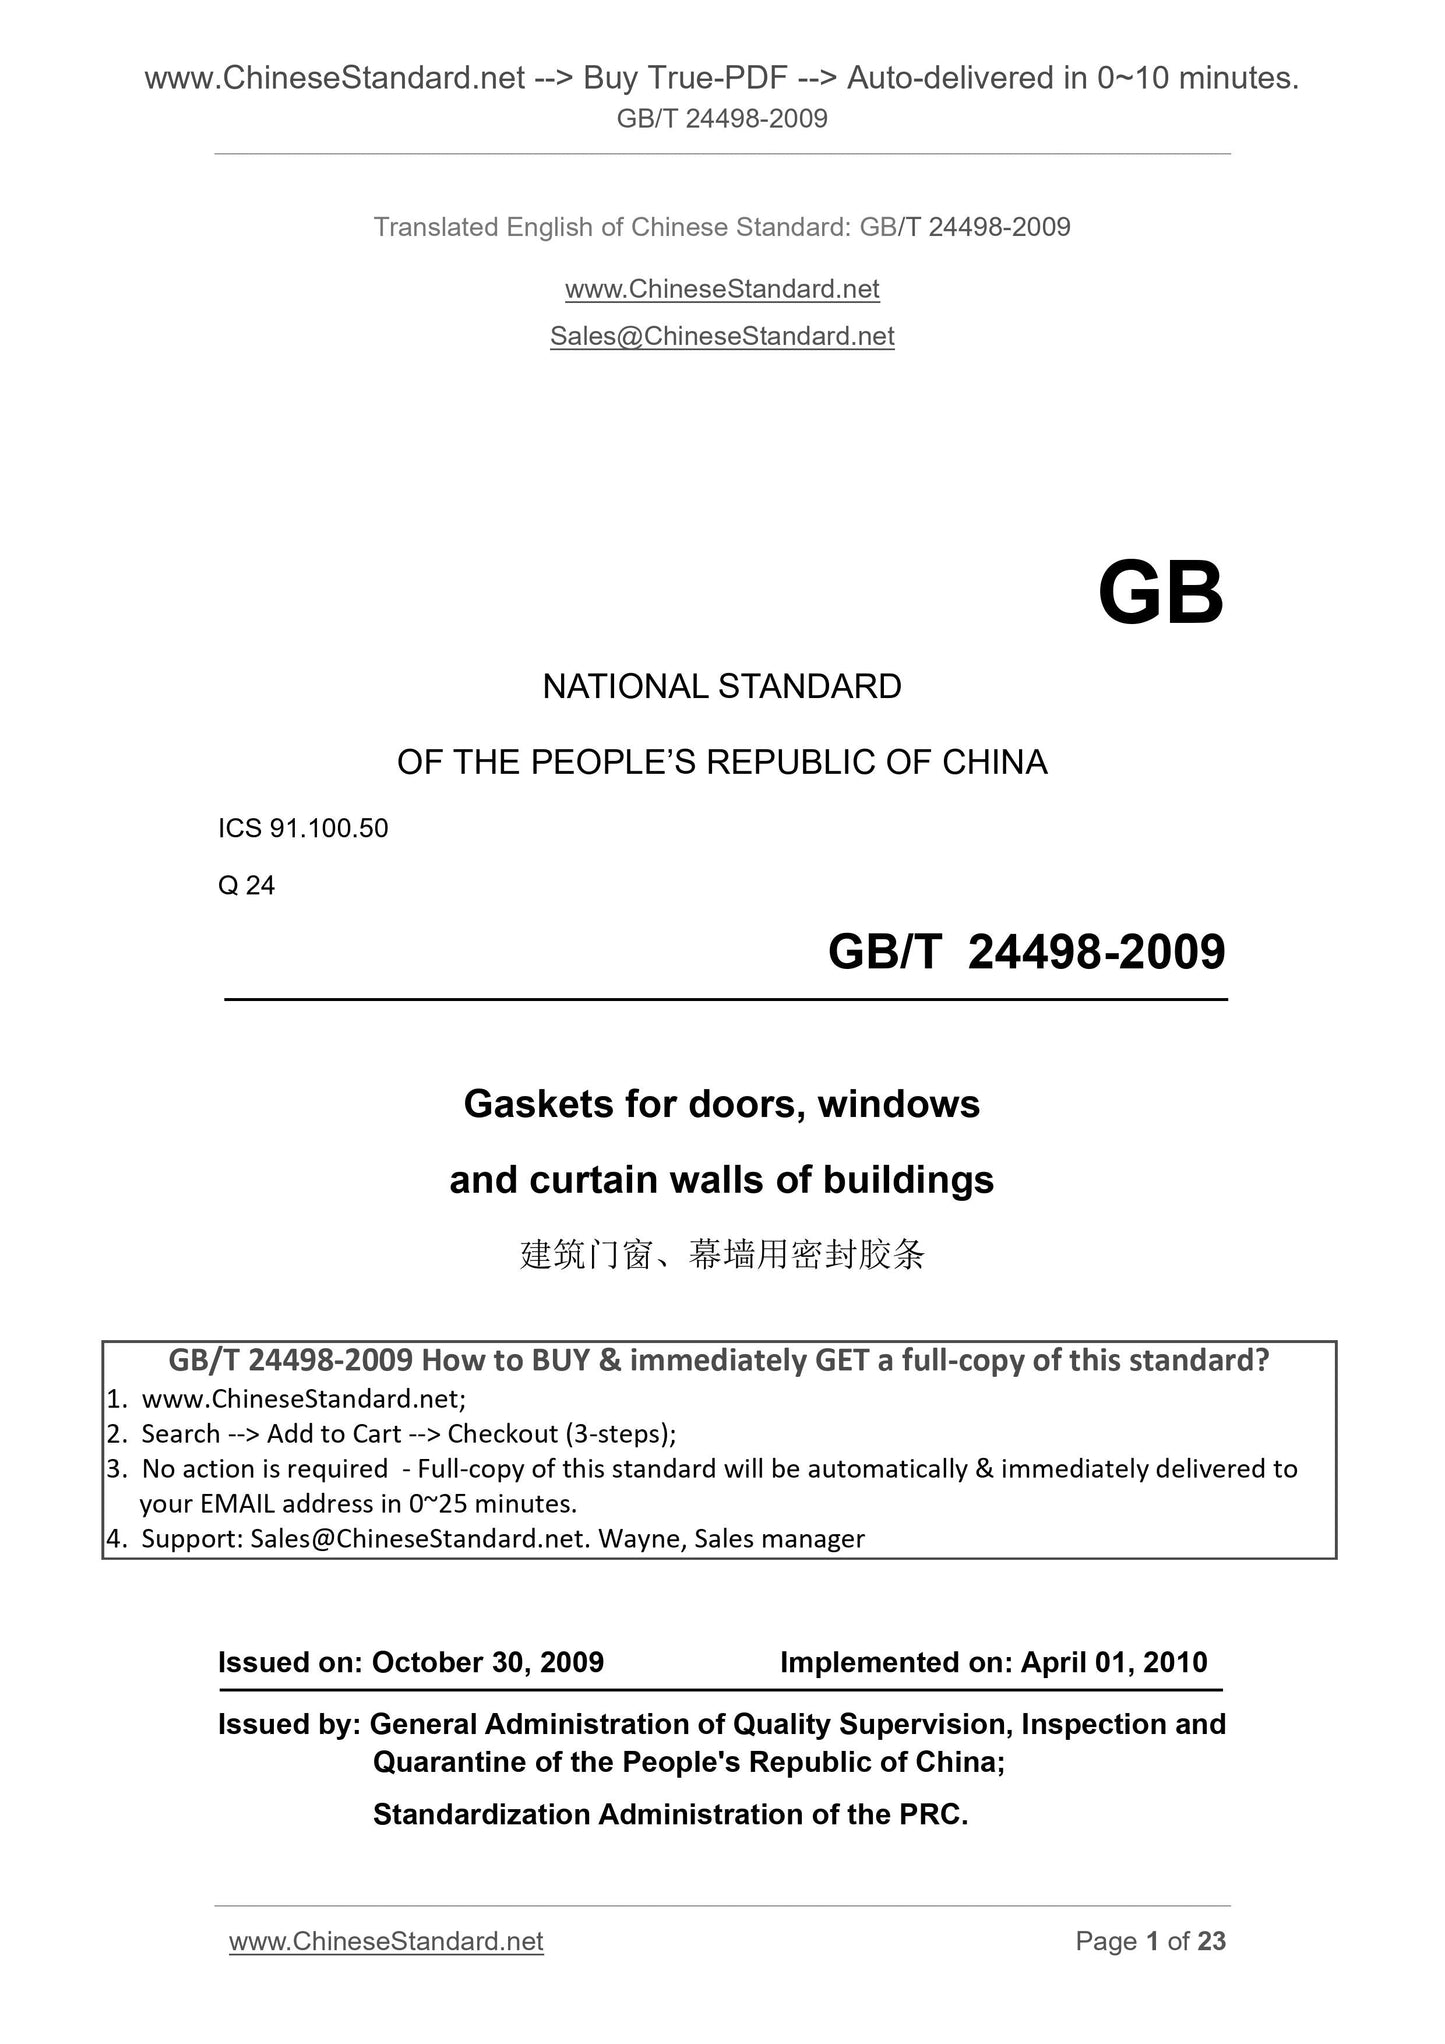 GB/T 24498-2009 Page 1